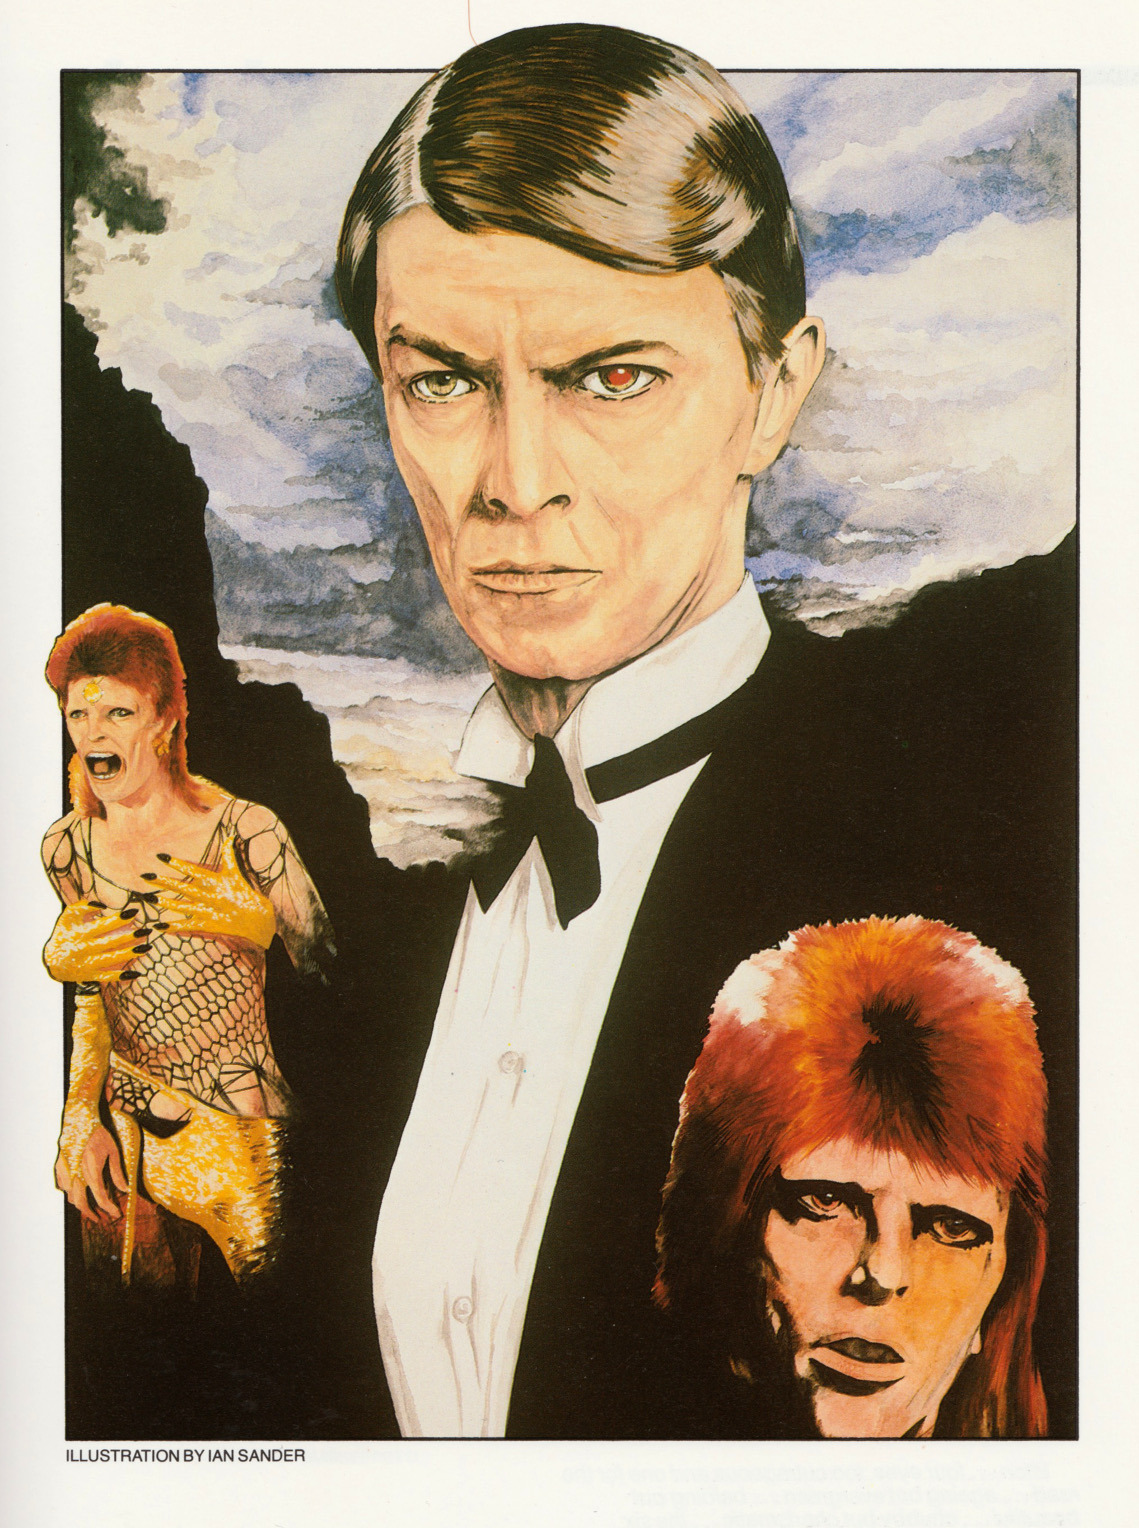 David Bowie, illustration by Ian Sander. From Visions of Rock (Proteus Books, 1981).